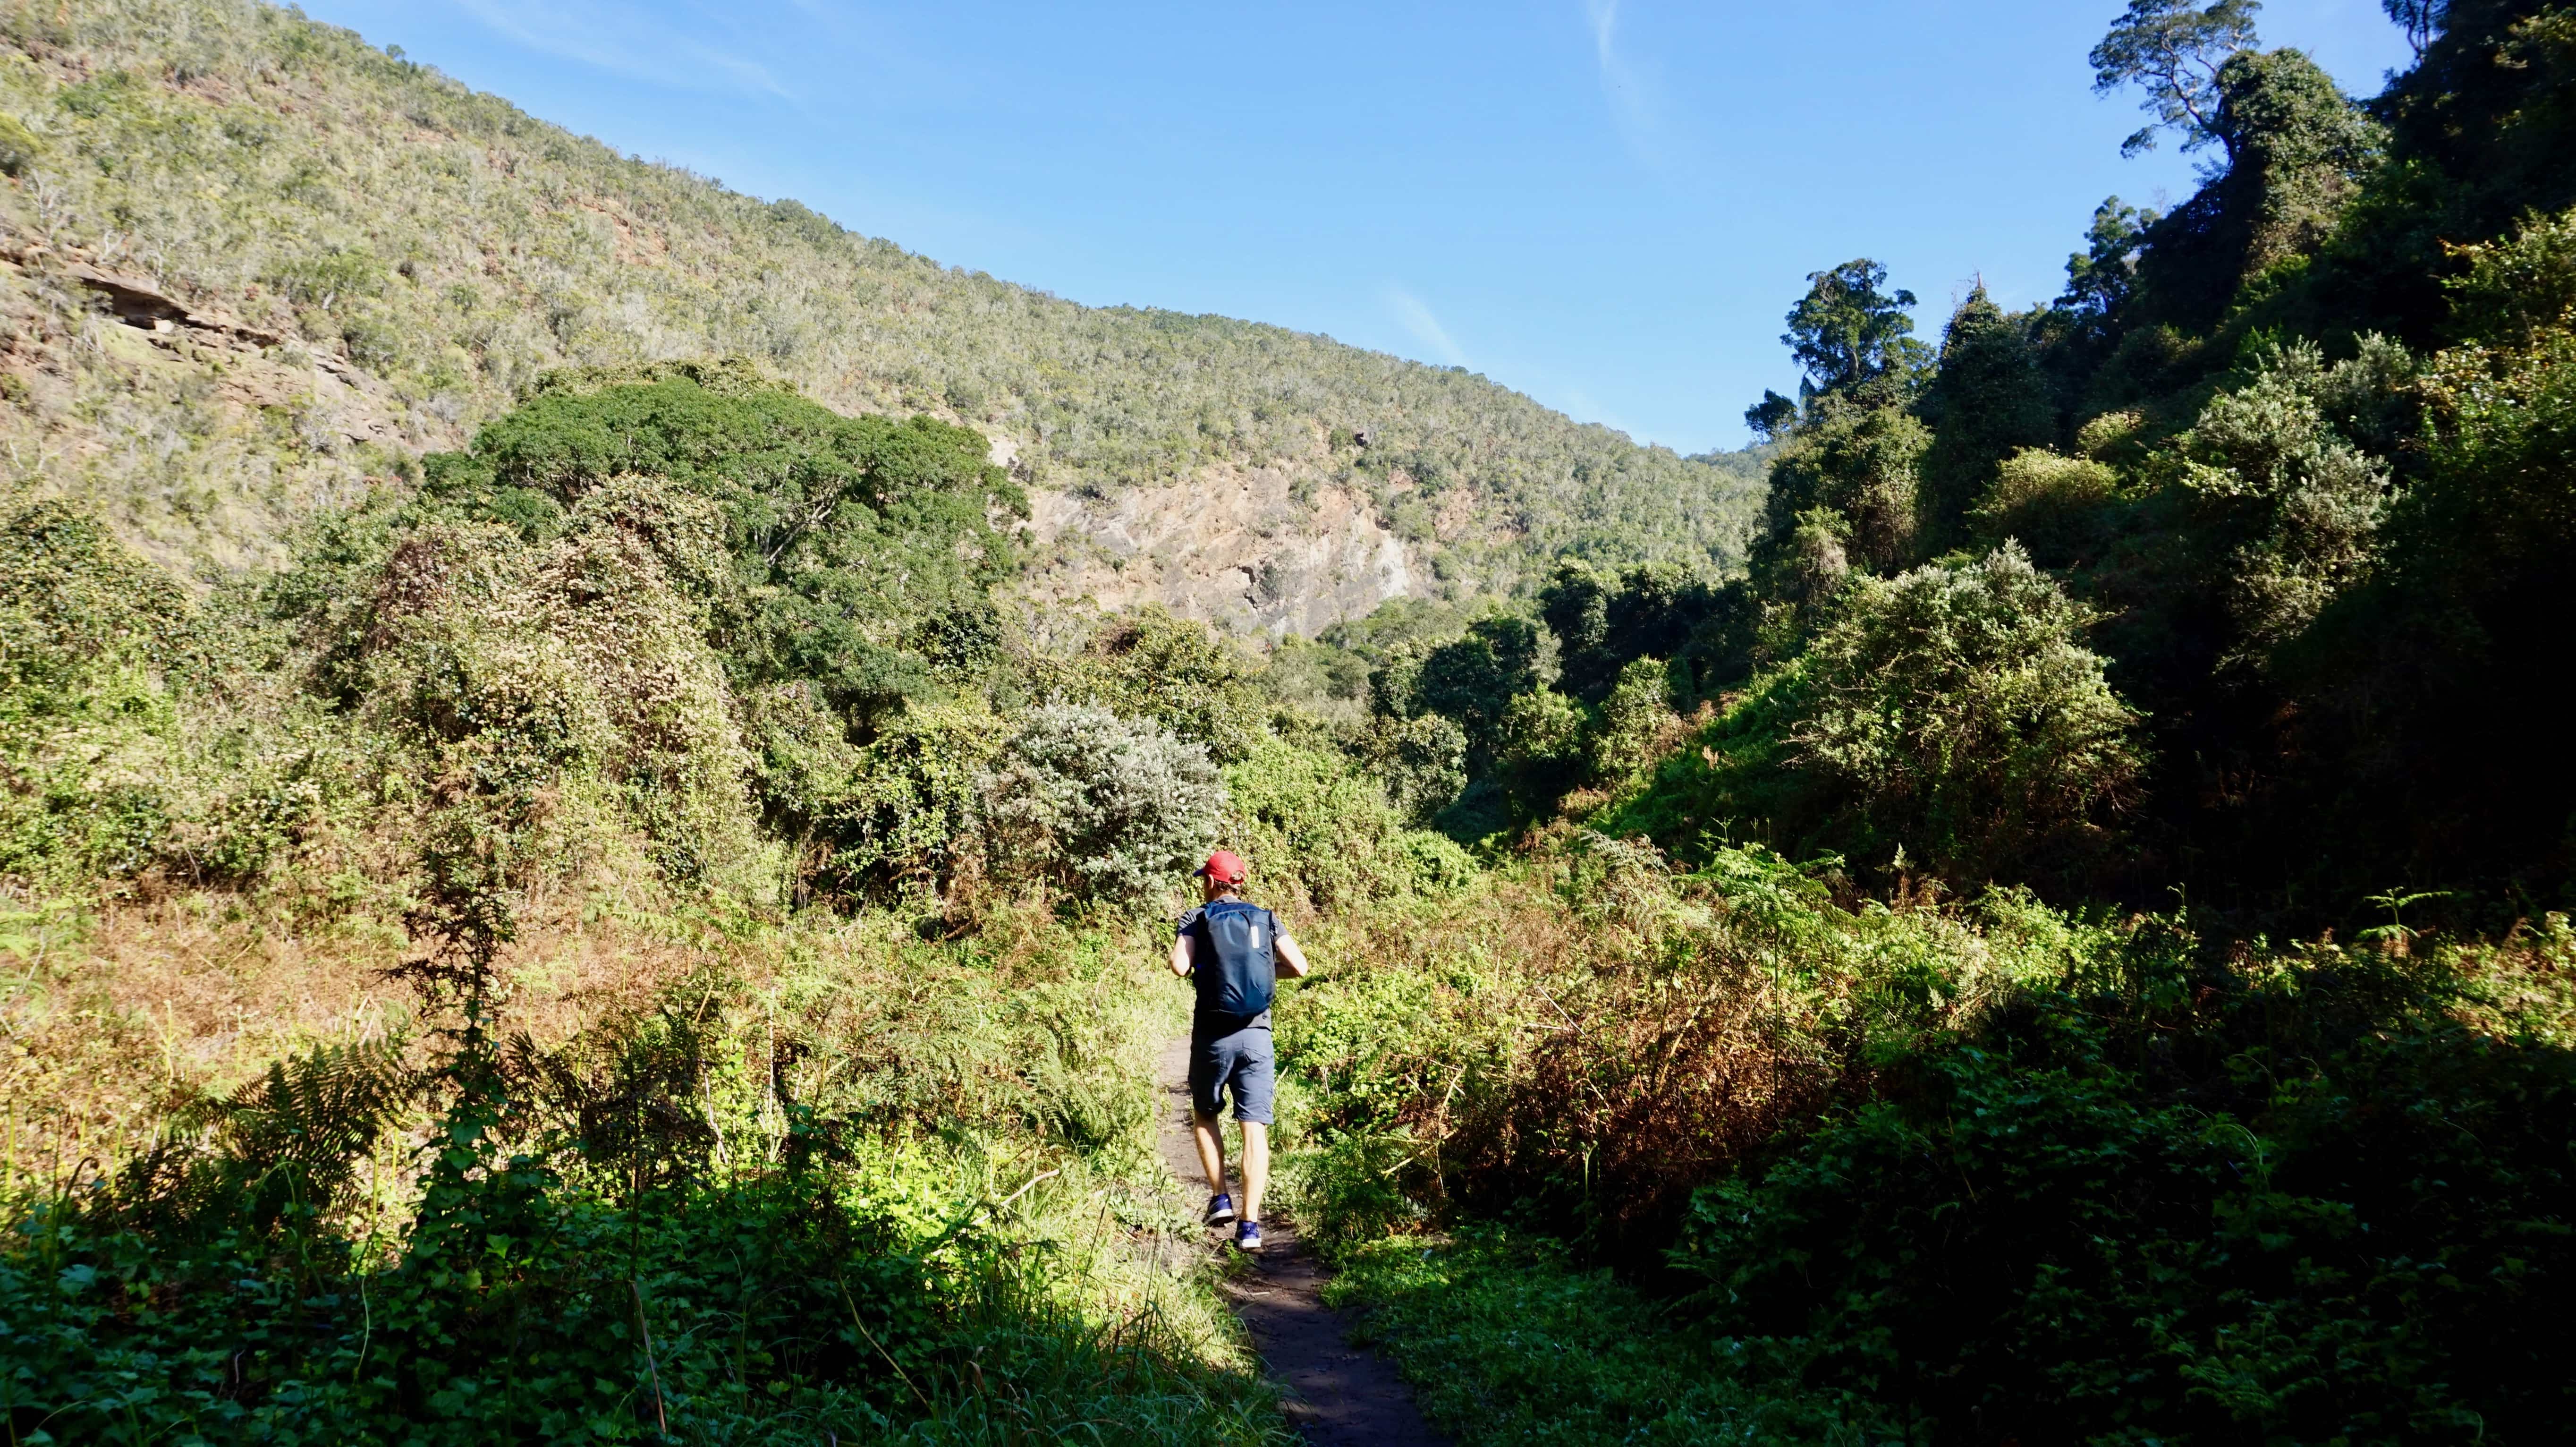 Andrew hiking in Garden Route National Park, South Africa